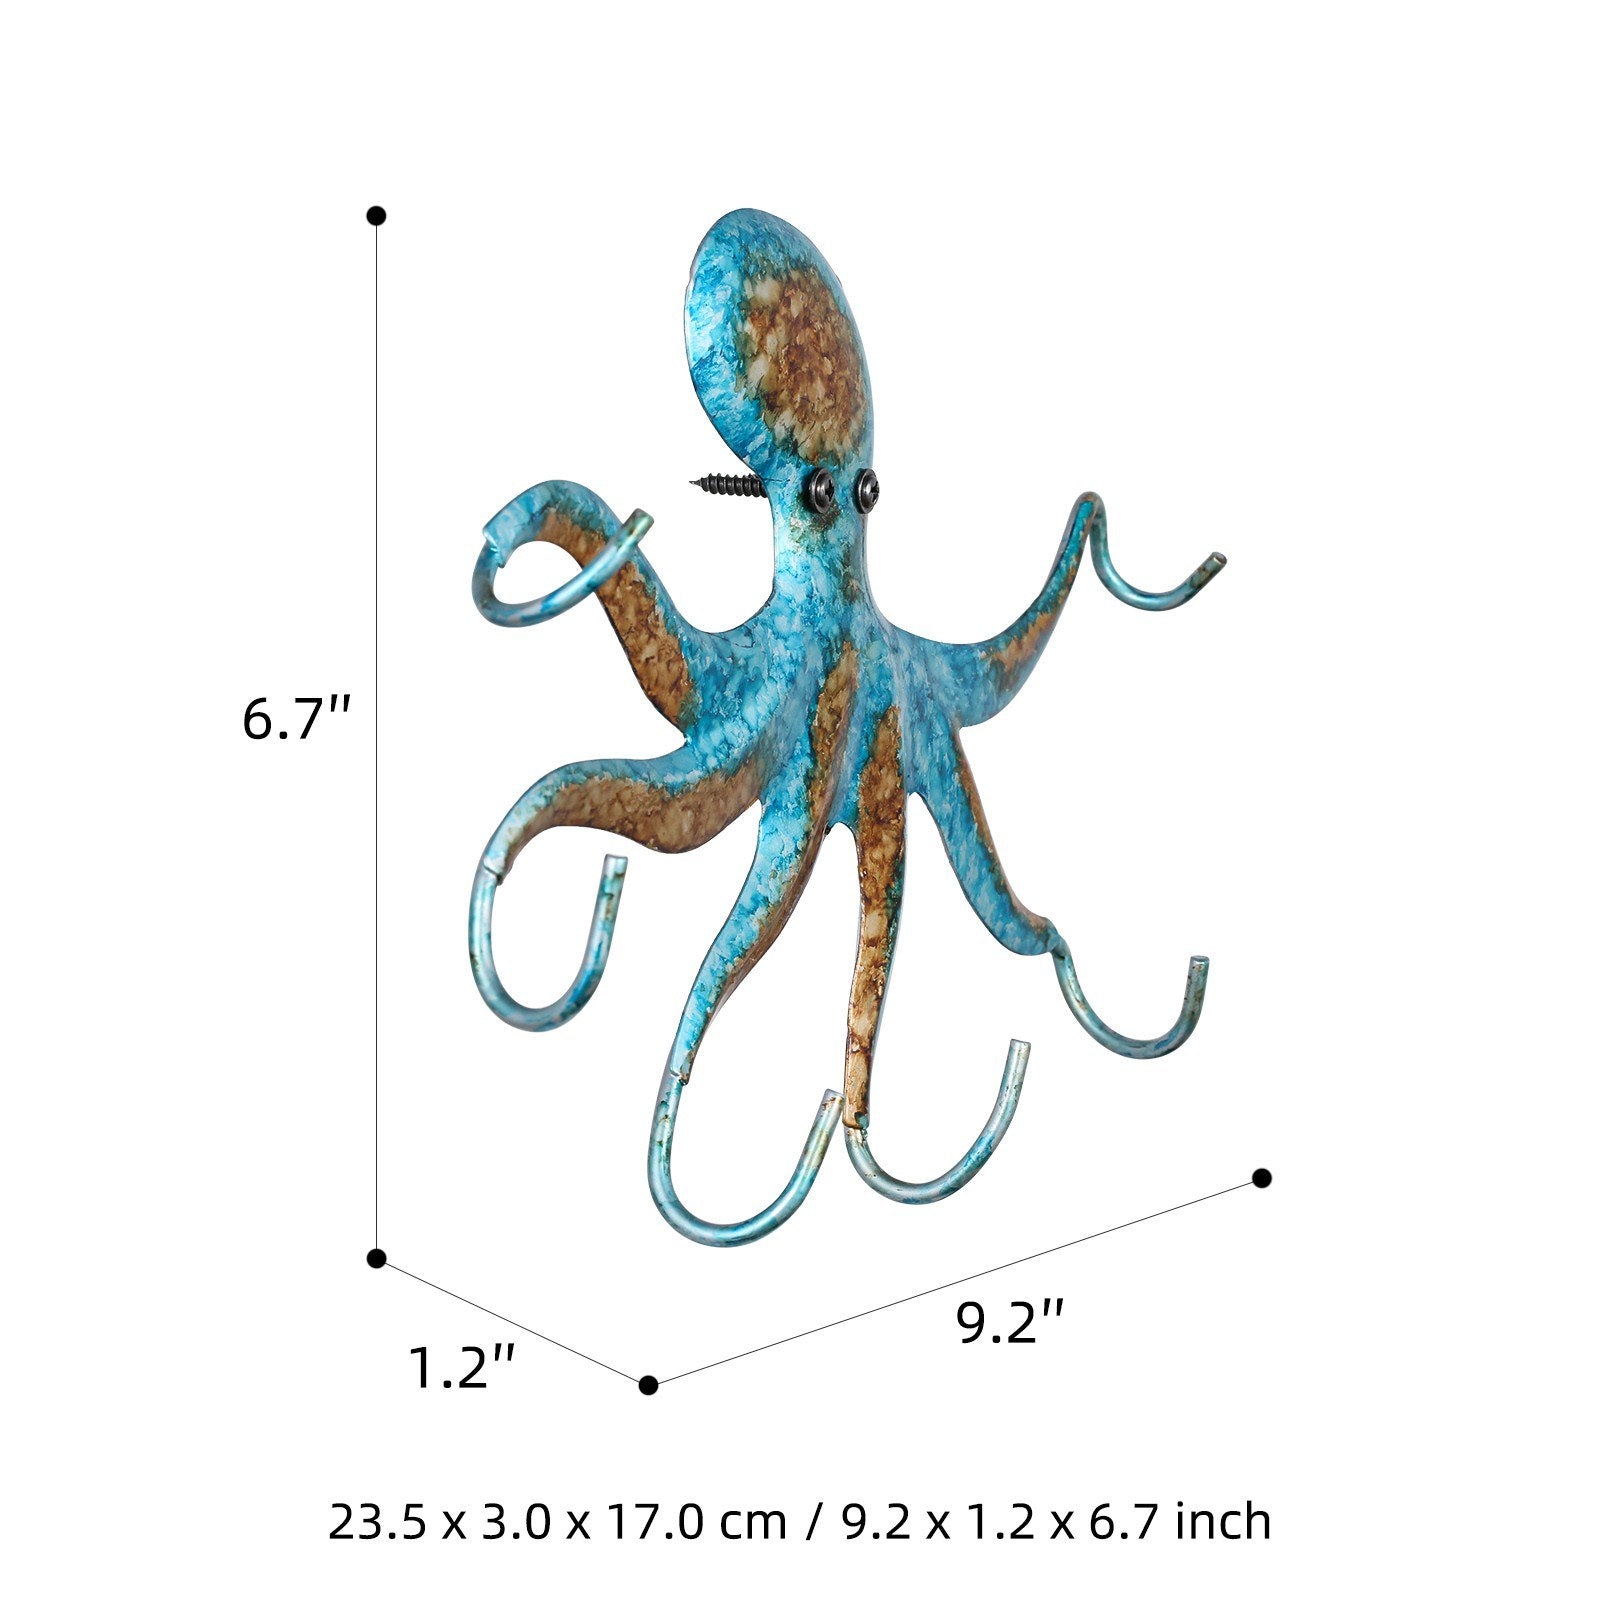 This octopus wall hook can be used for hanging clothes, bags, towels, and other items. The funny shape will easily catch people's attention